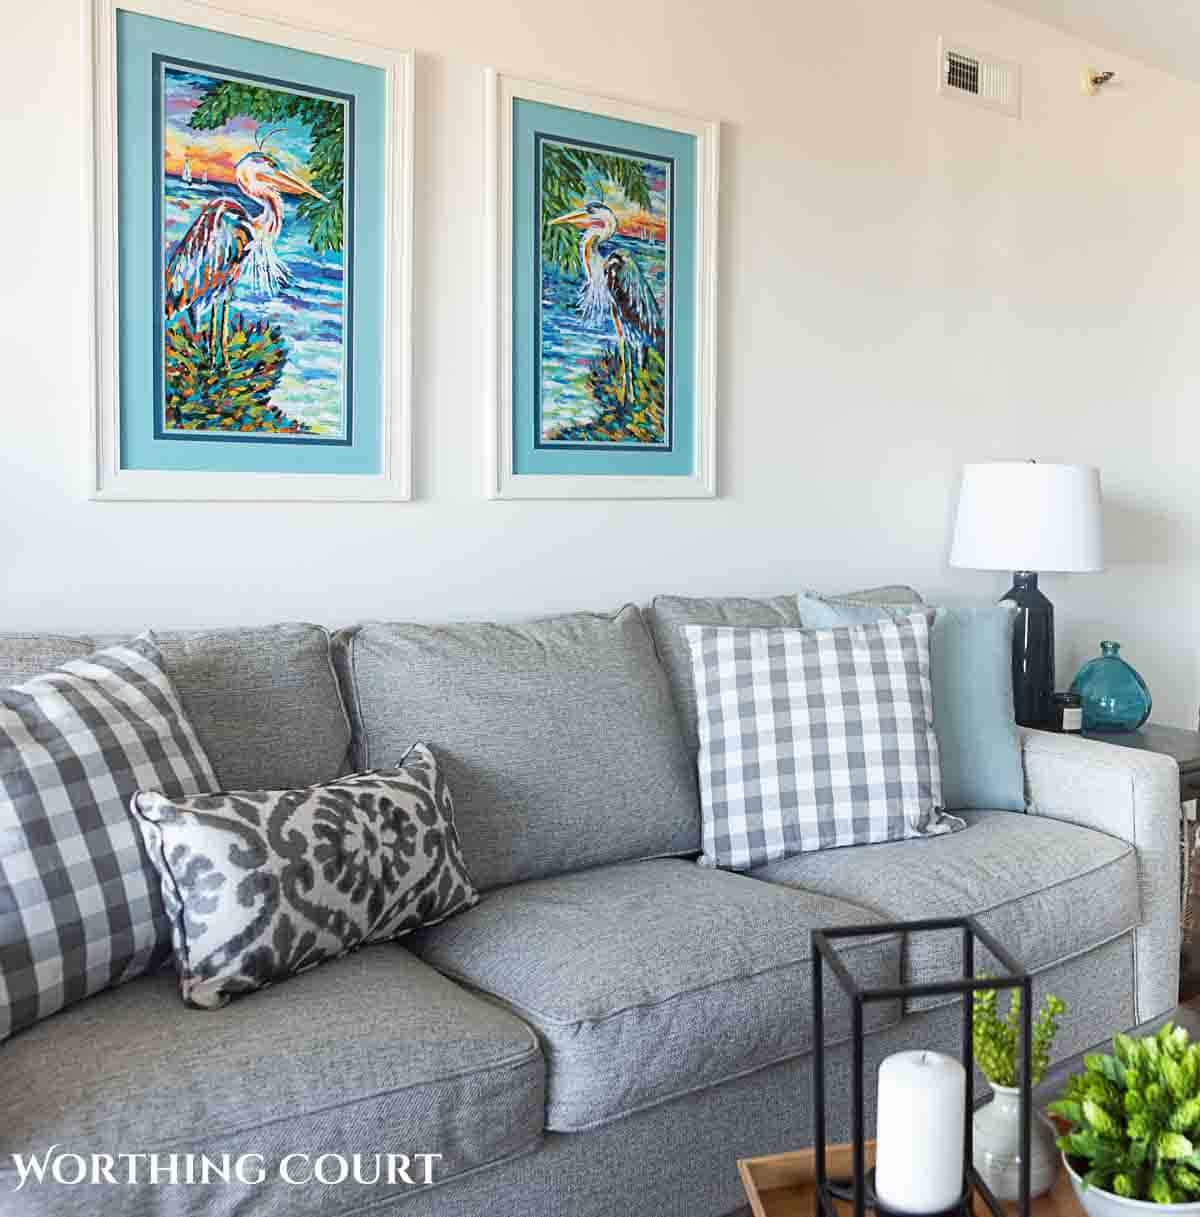 colorful coastal artwork above a gray couch